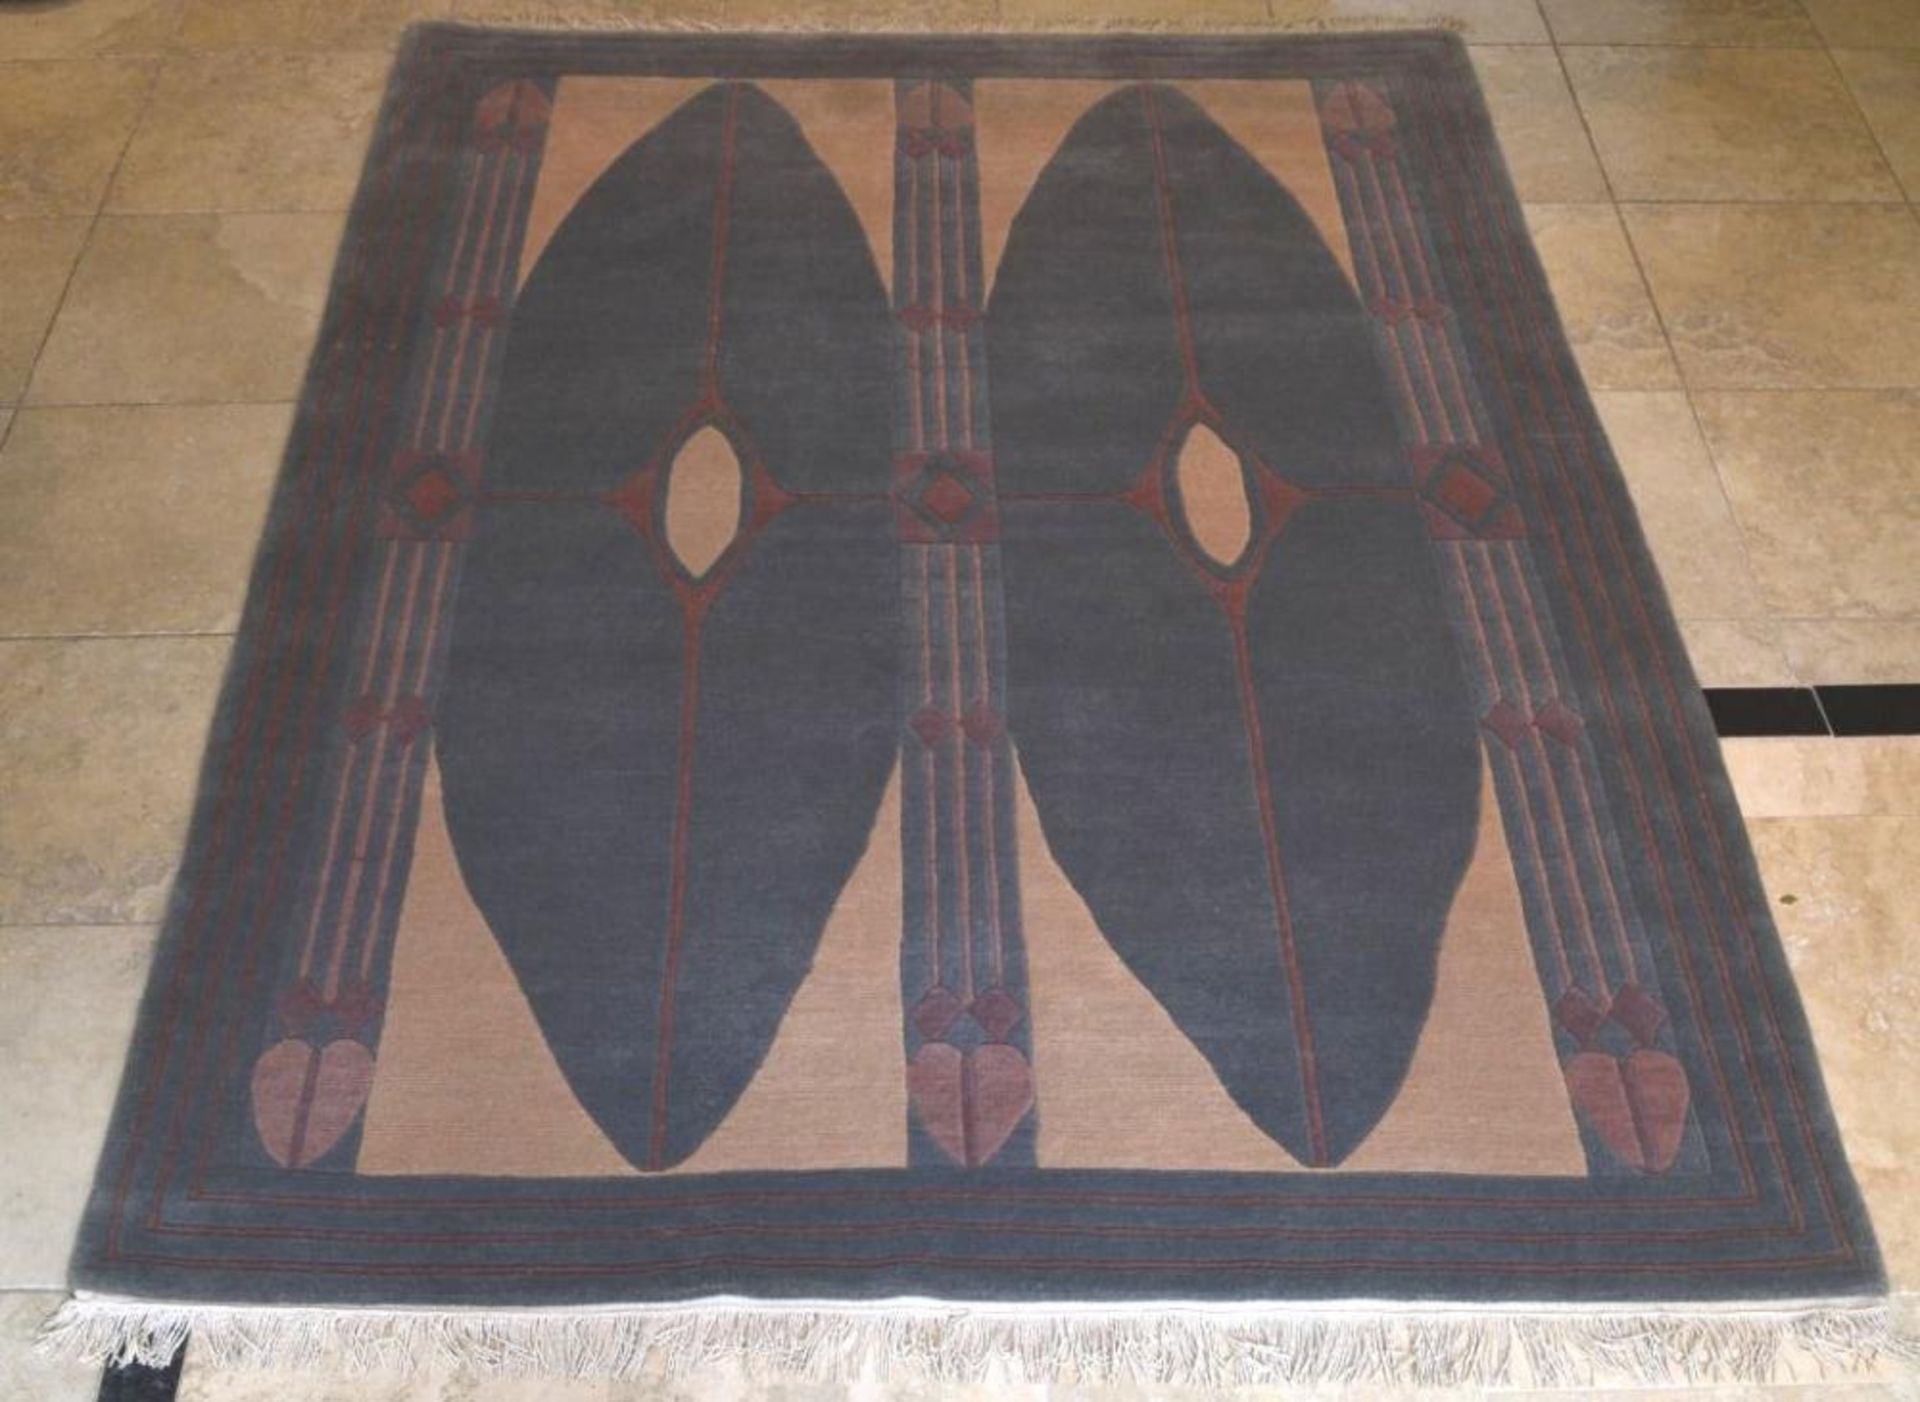 1 x Hand Knotted Mackintosh Design Nepalese Carpet - 100% Wool - Dimensions: 174x247cm - Unused - NO - Image 4 of 12